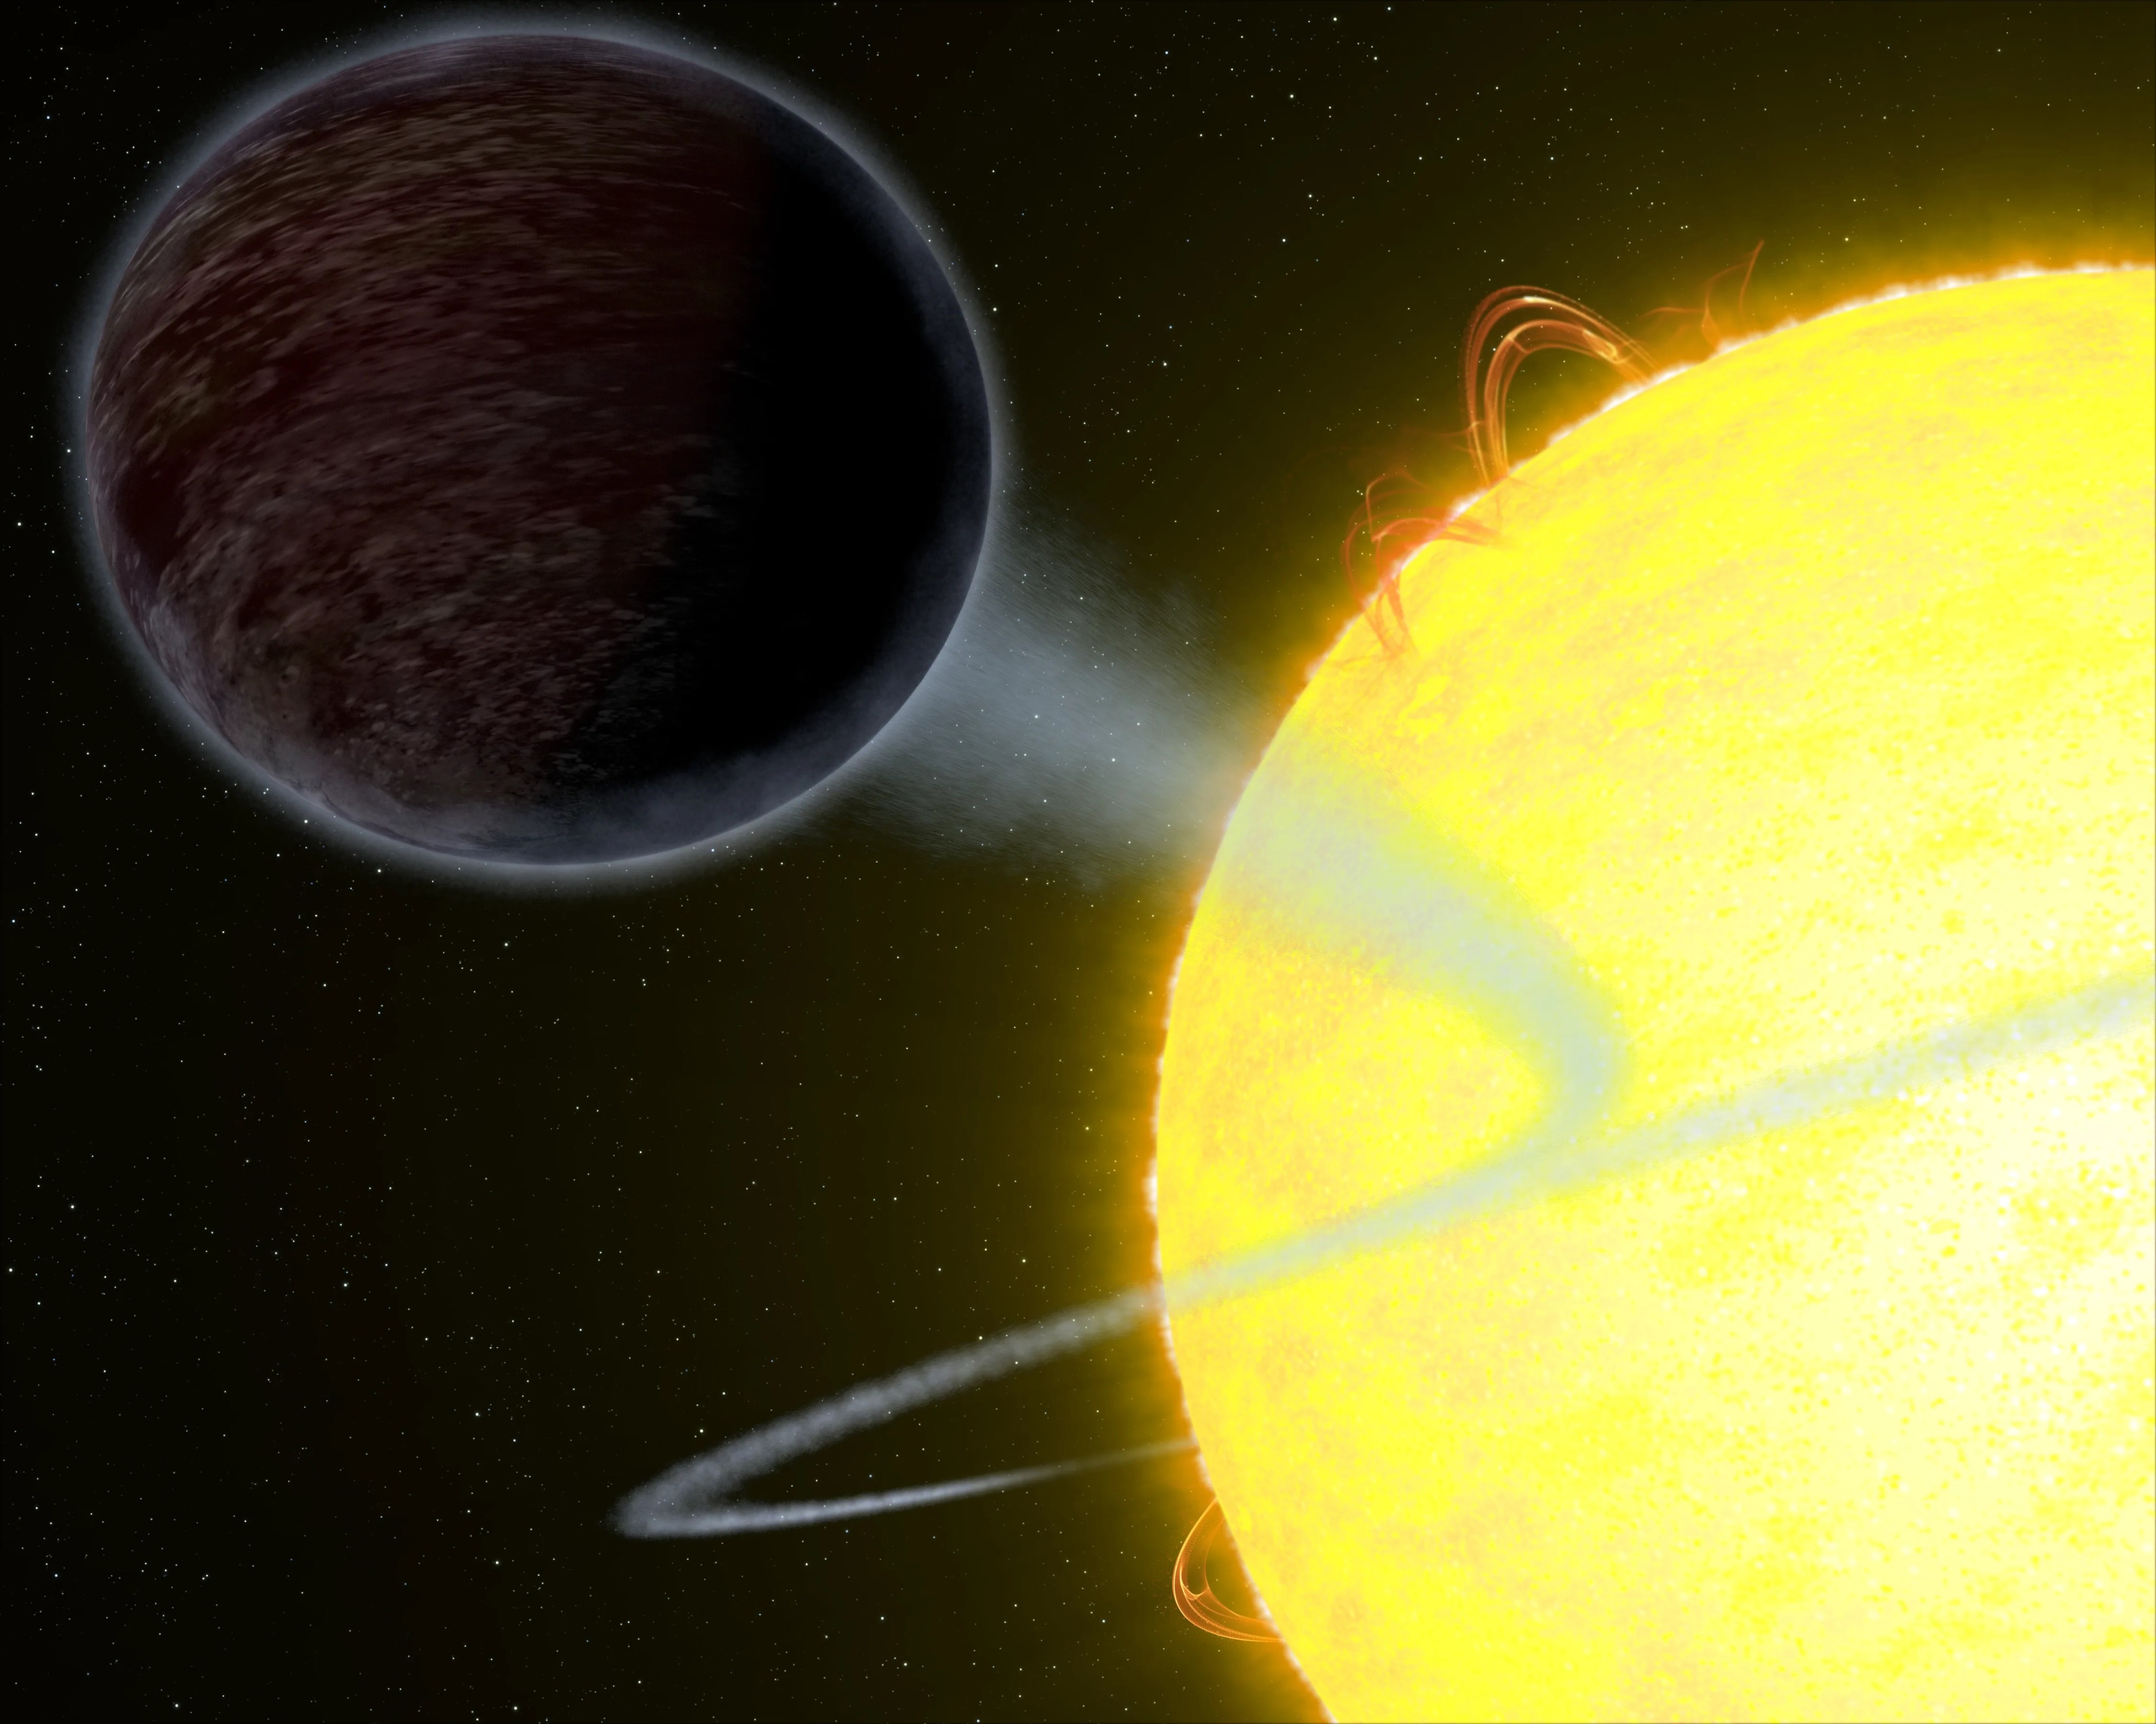 Upper left, black planet. Lower right half of image holds a bright yellow star with orange-red prominences.